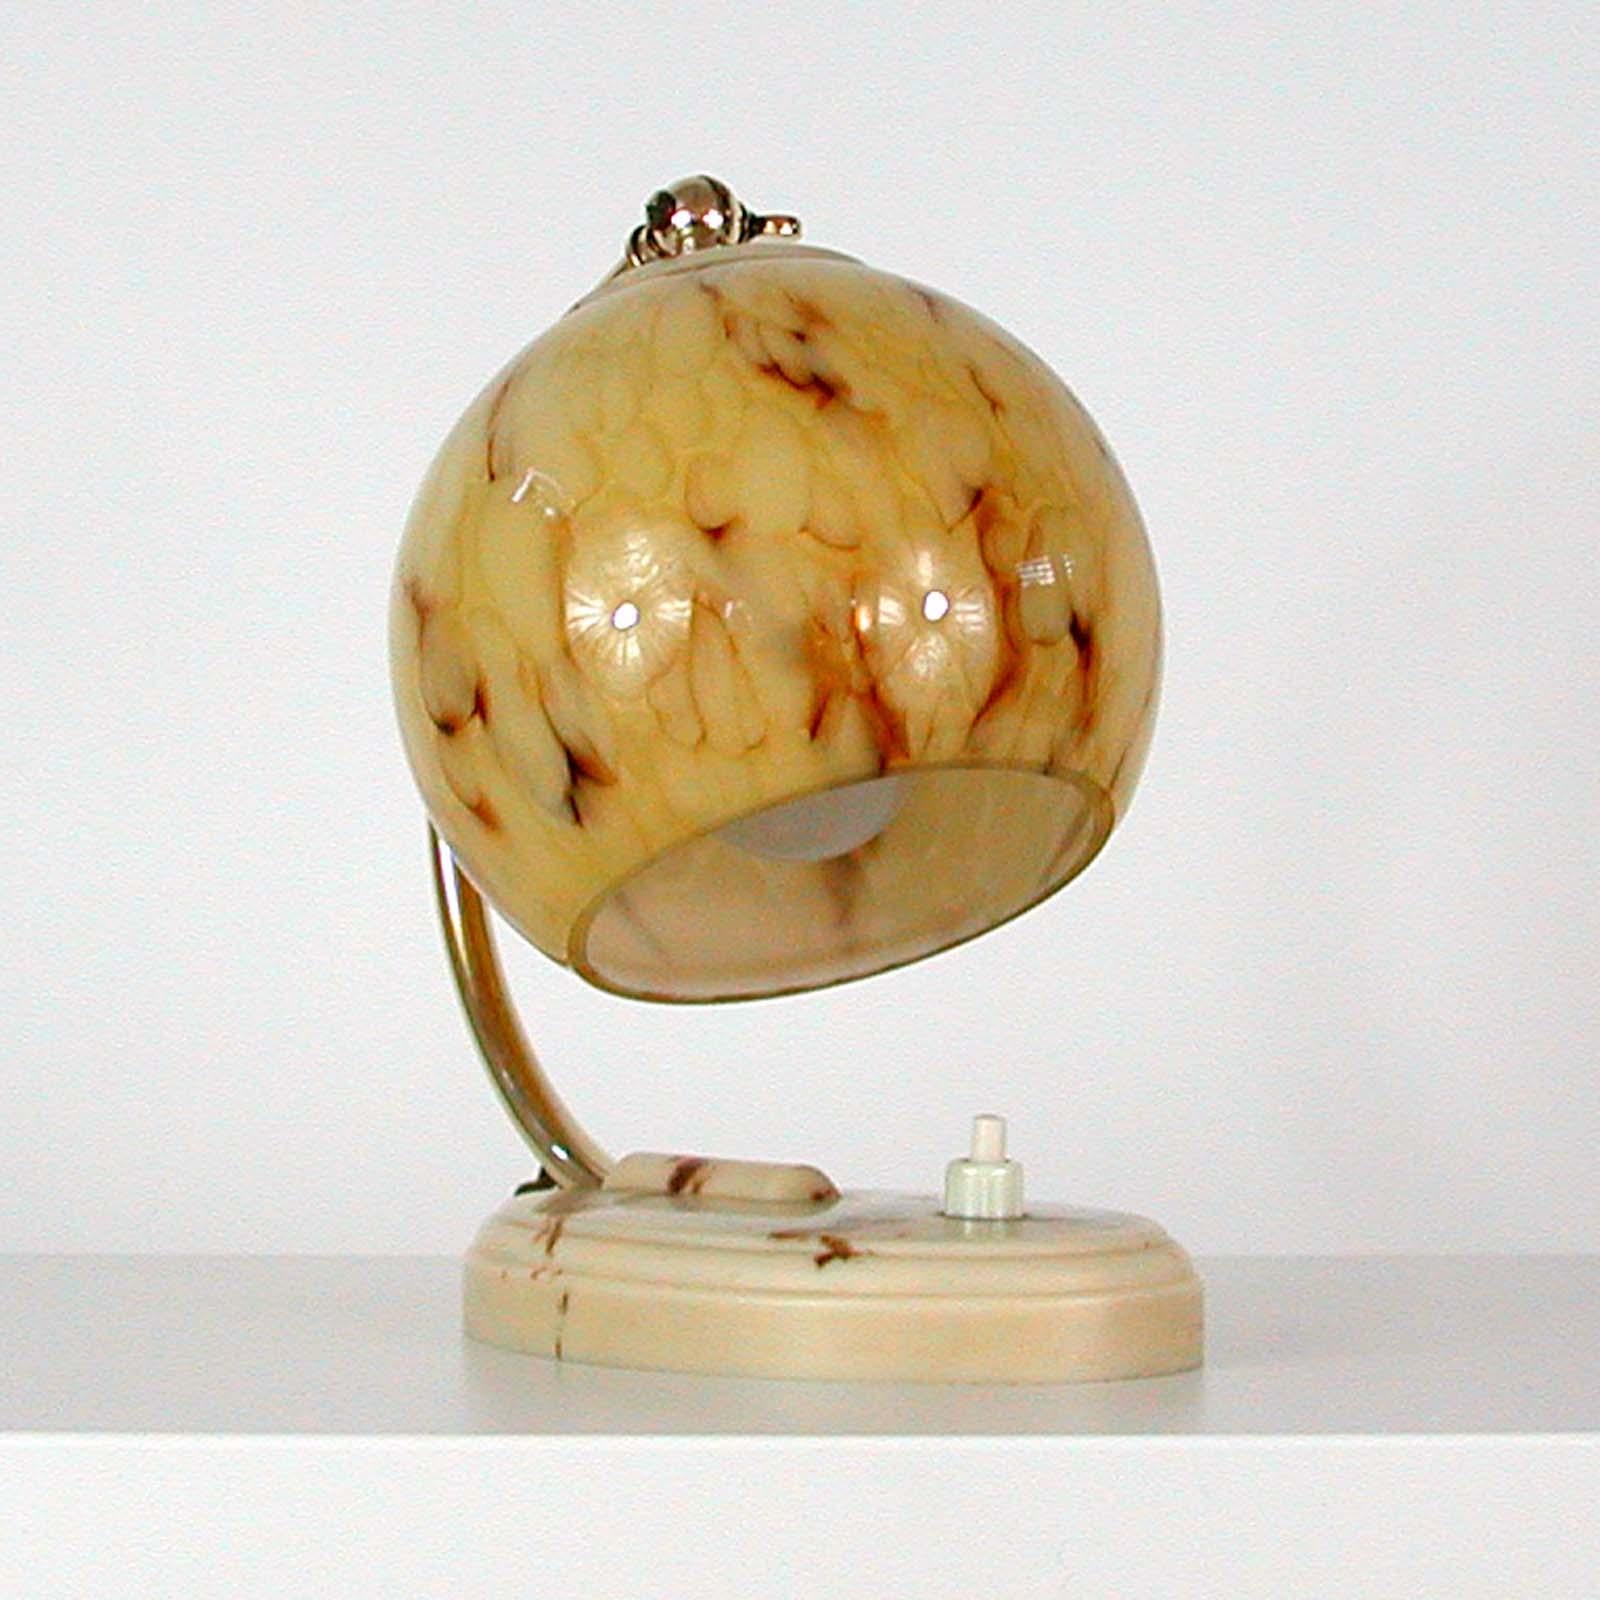 This unusual vintage table or bedside lamp was made in Germany in the 1930s-1940s during the Bauhaus period. It is made of polished brass and has got an adjustable lamp shade in cream marbled opaline glass. The base is made of plastic, possibly